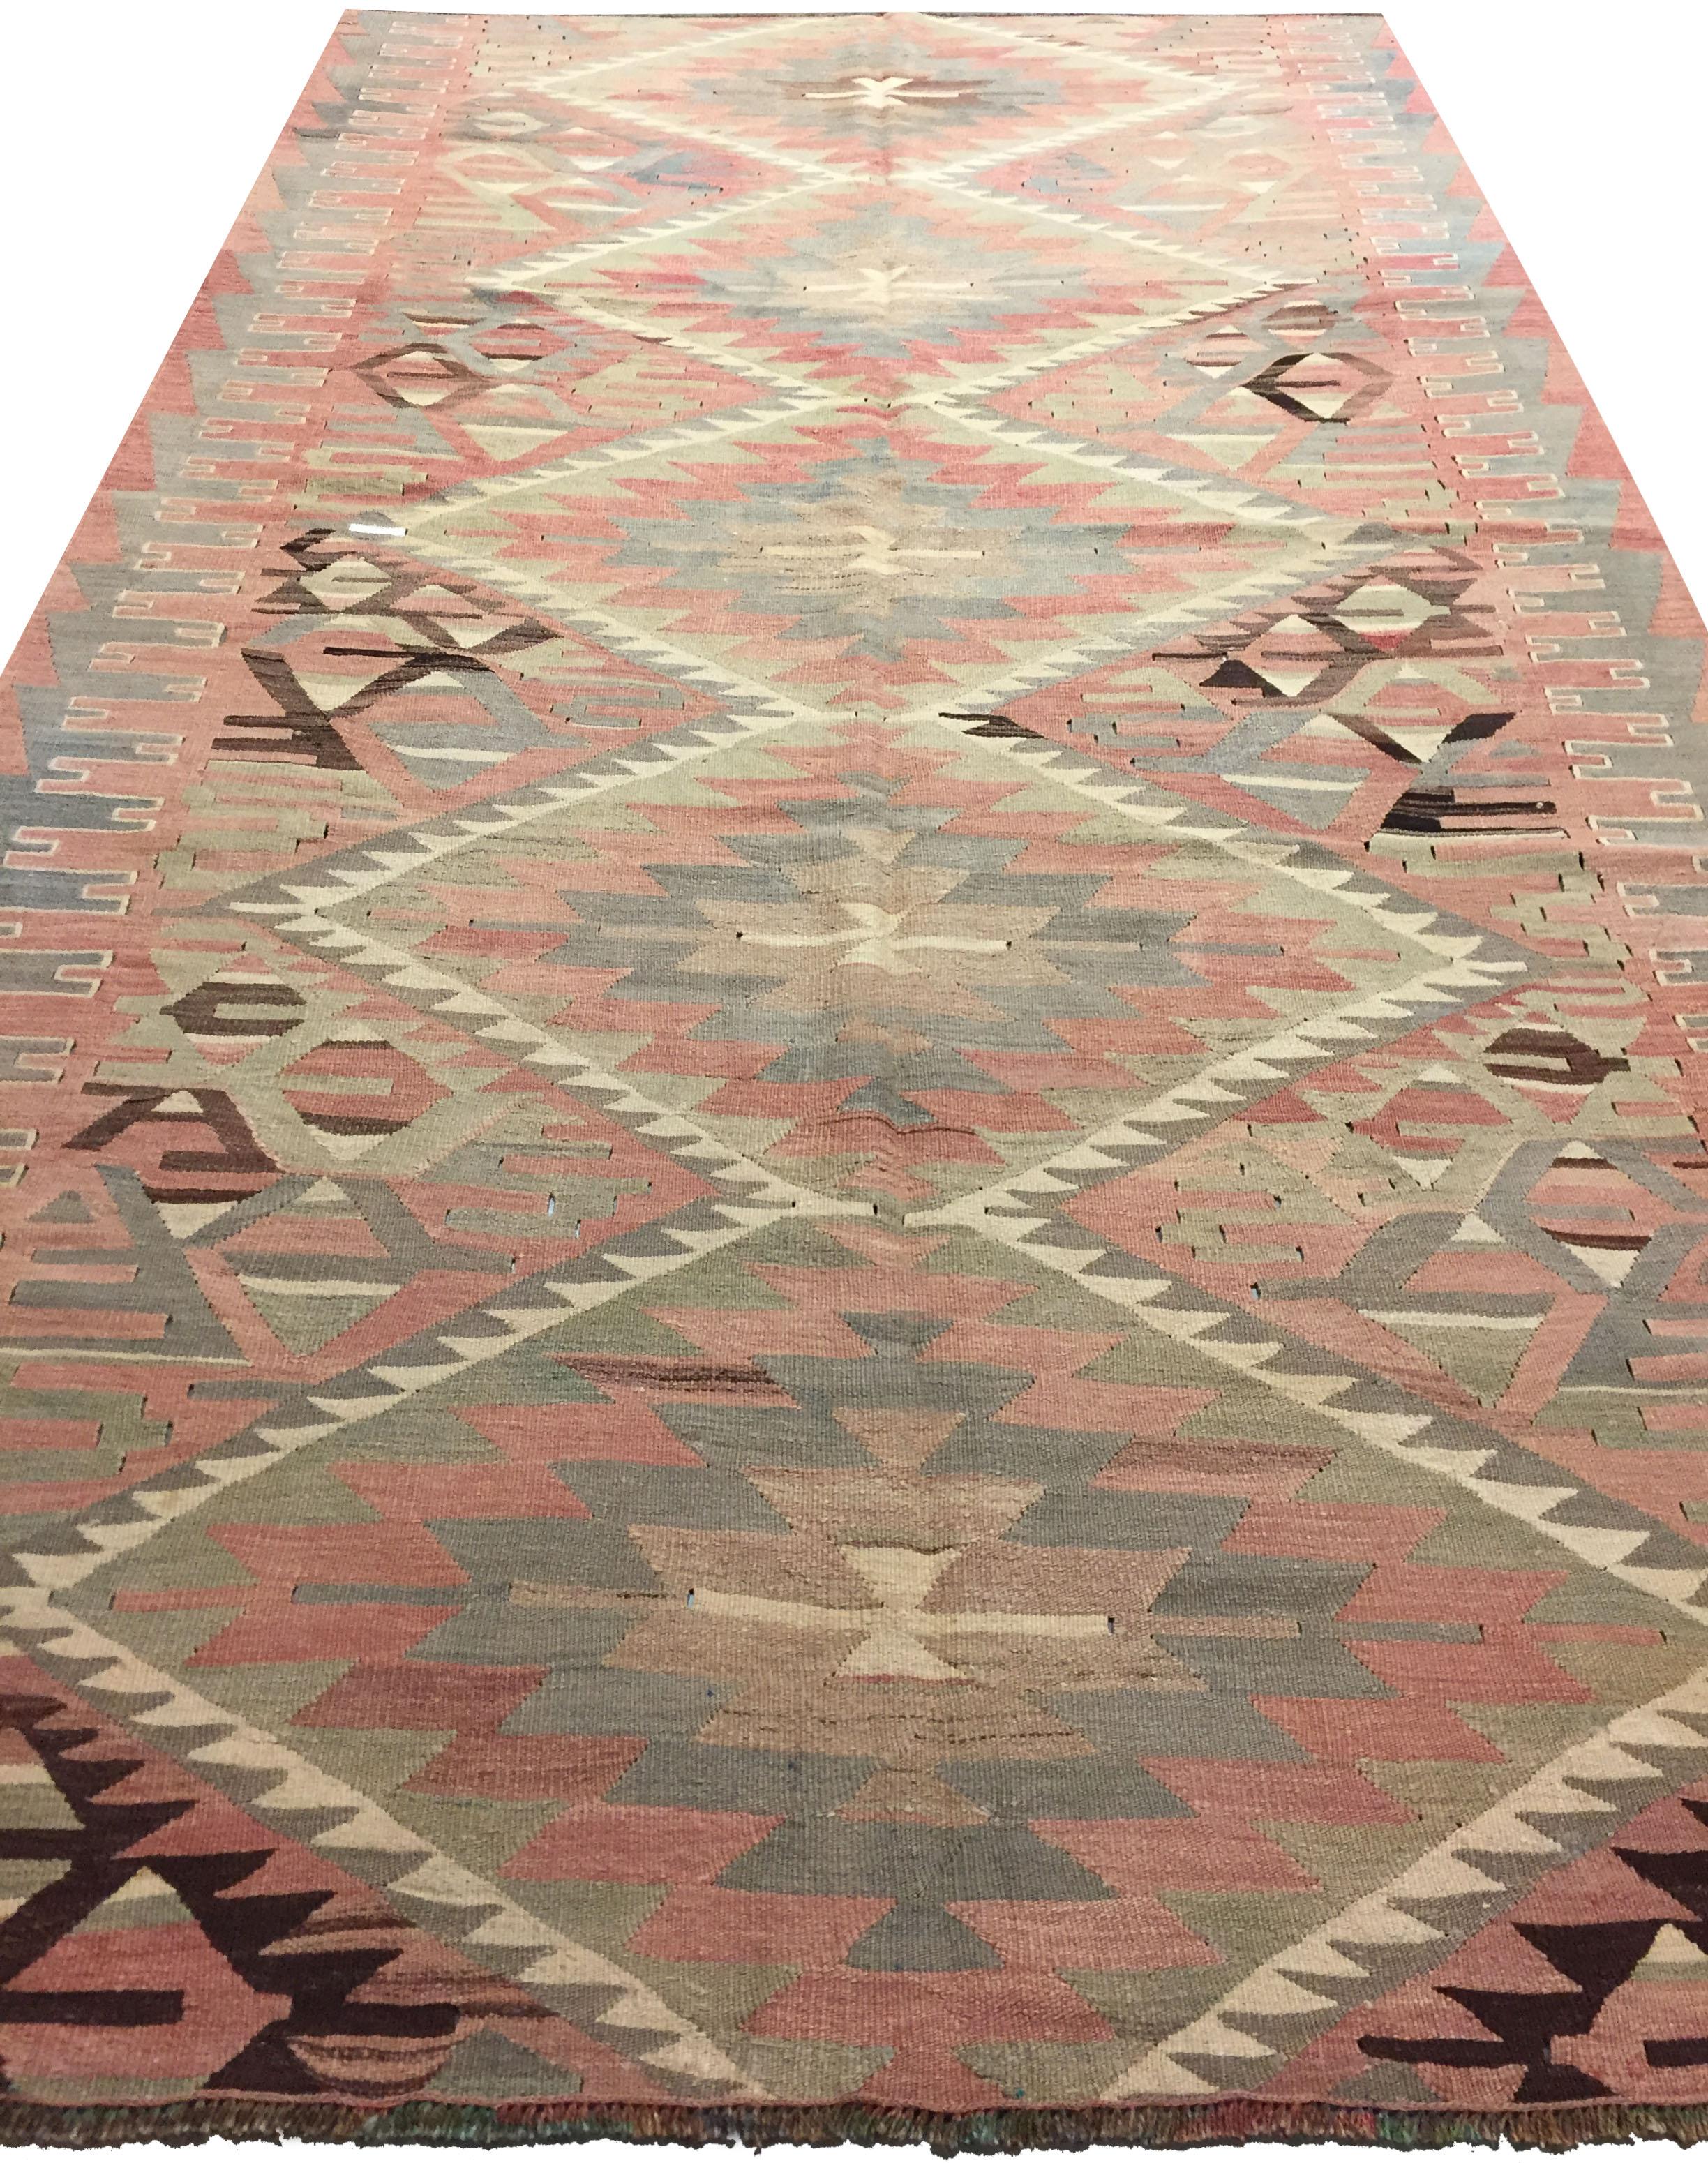 Vintage Turkish Kilim Rug  5'2 x 10' In Good Condition For Sale In New York, NY